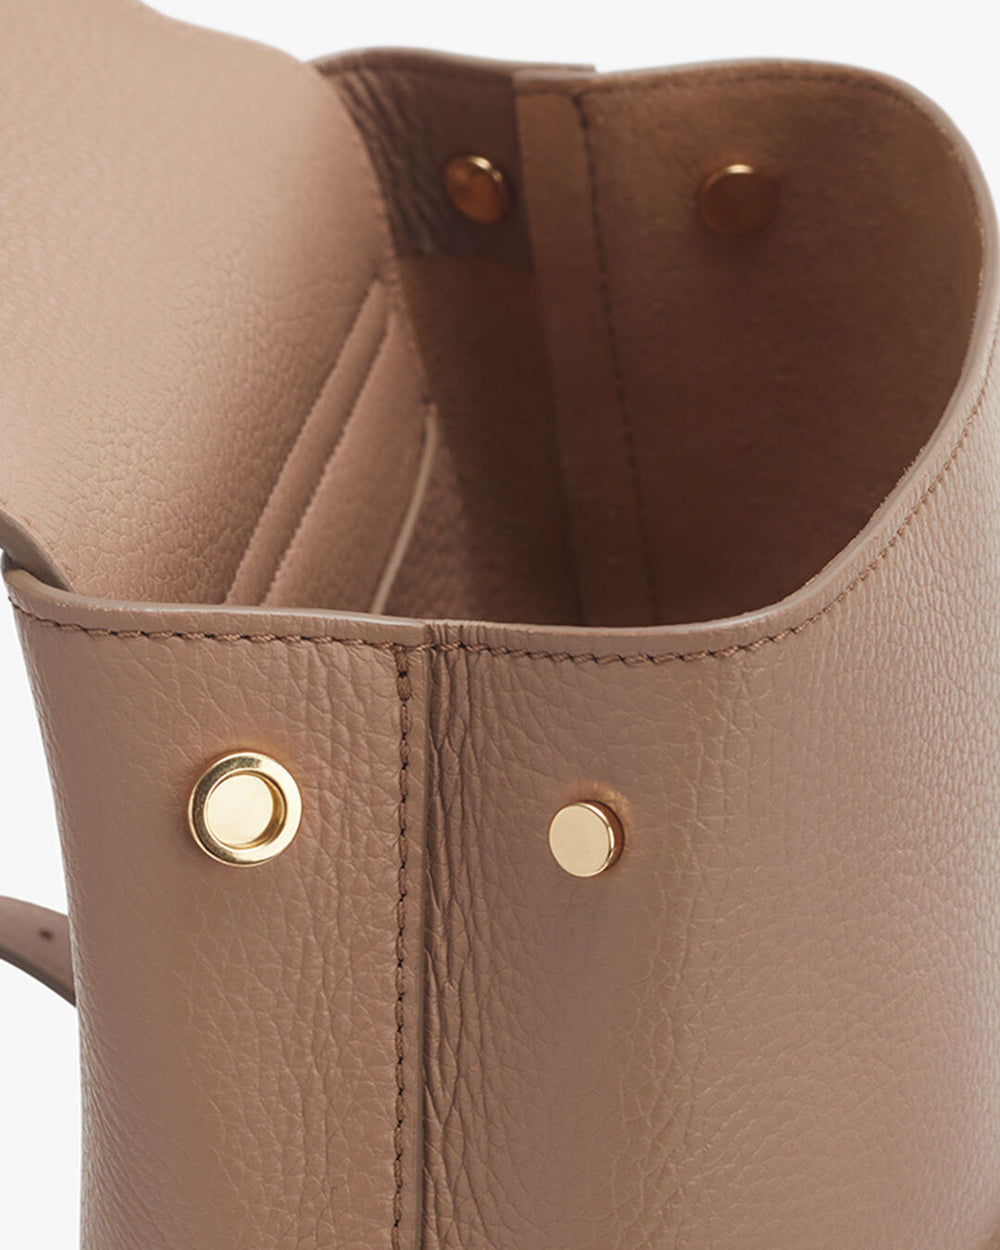 Close-up view of a bag with metallic rivets.